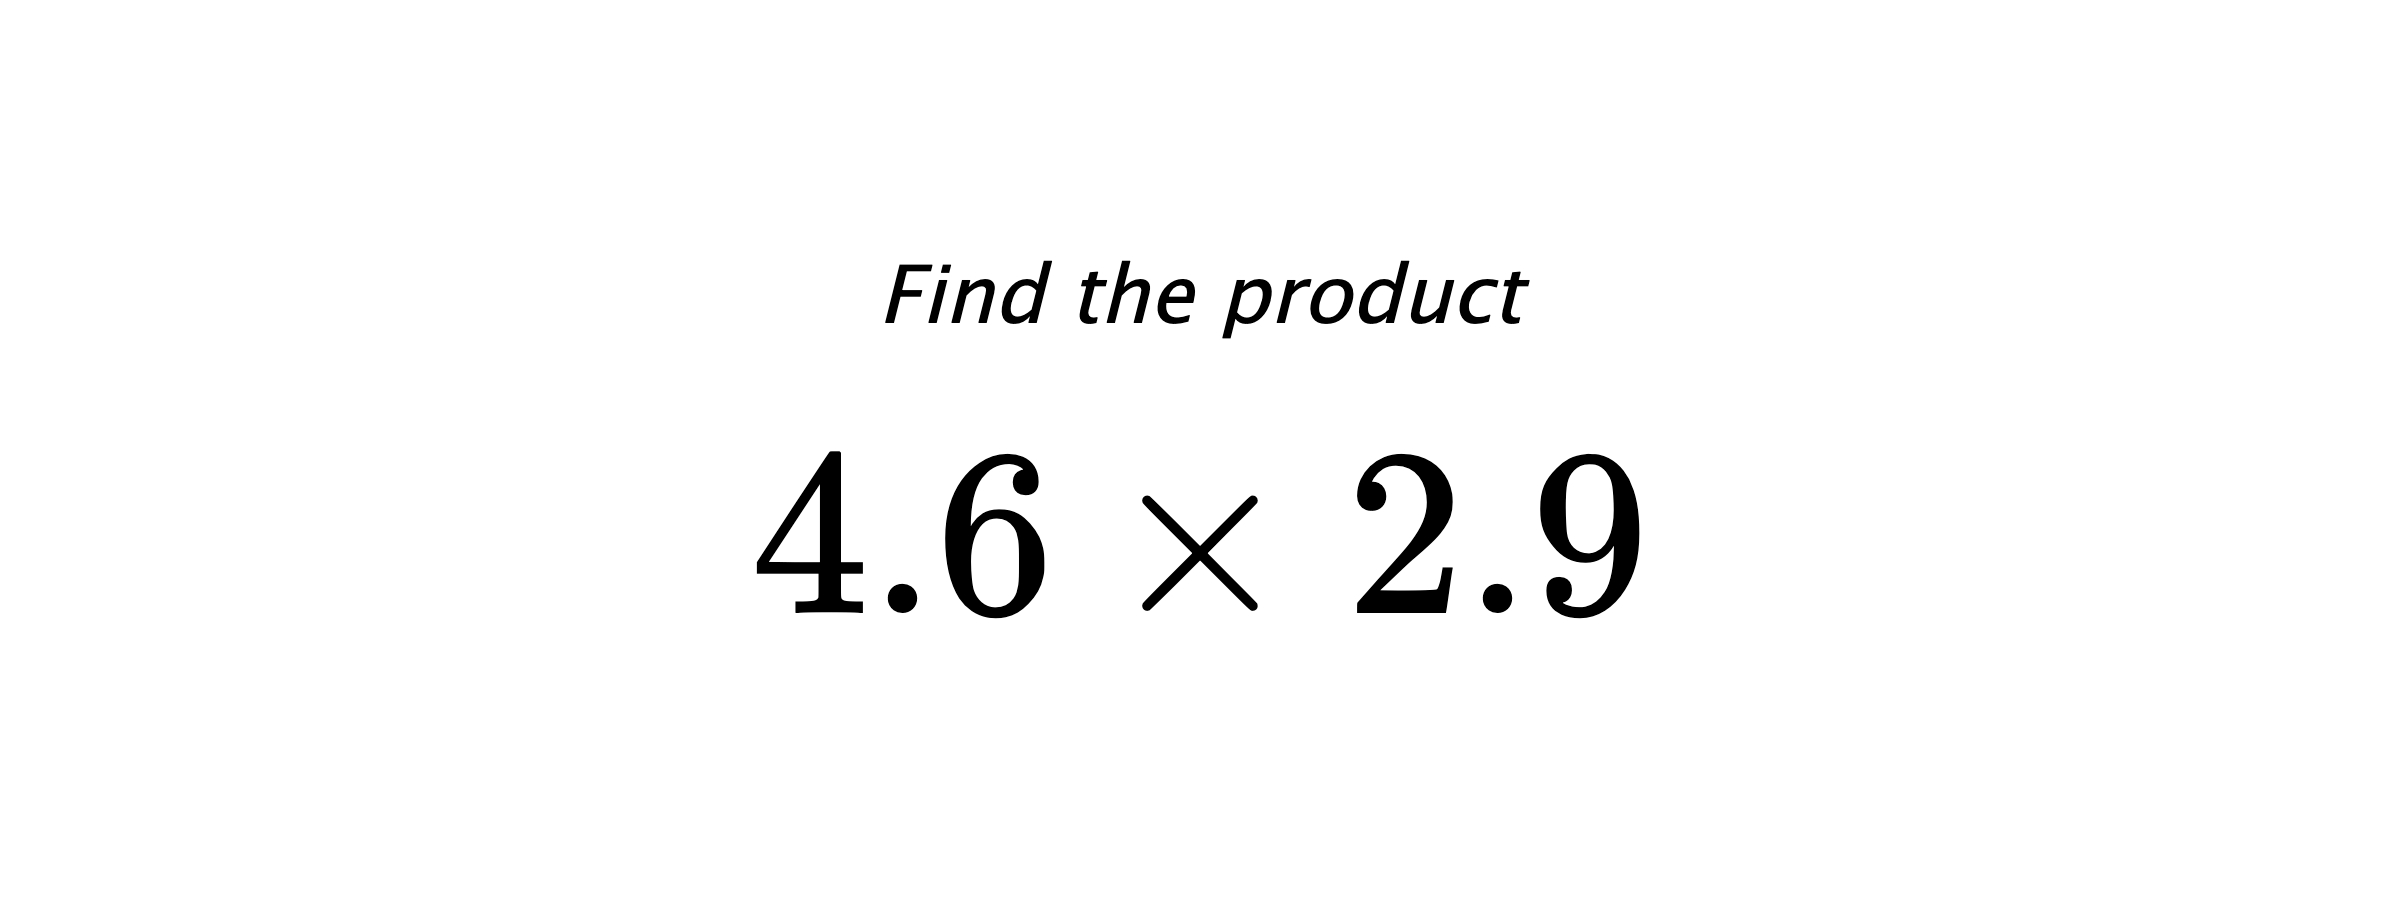 Find the product $ 4.6 \times 2.9 $